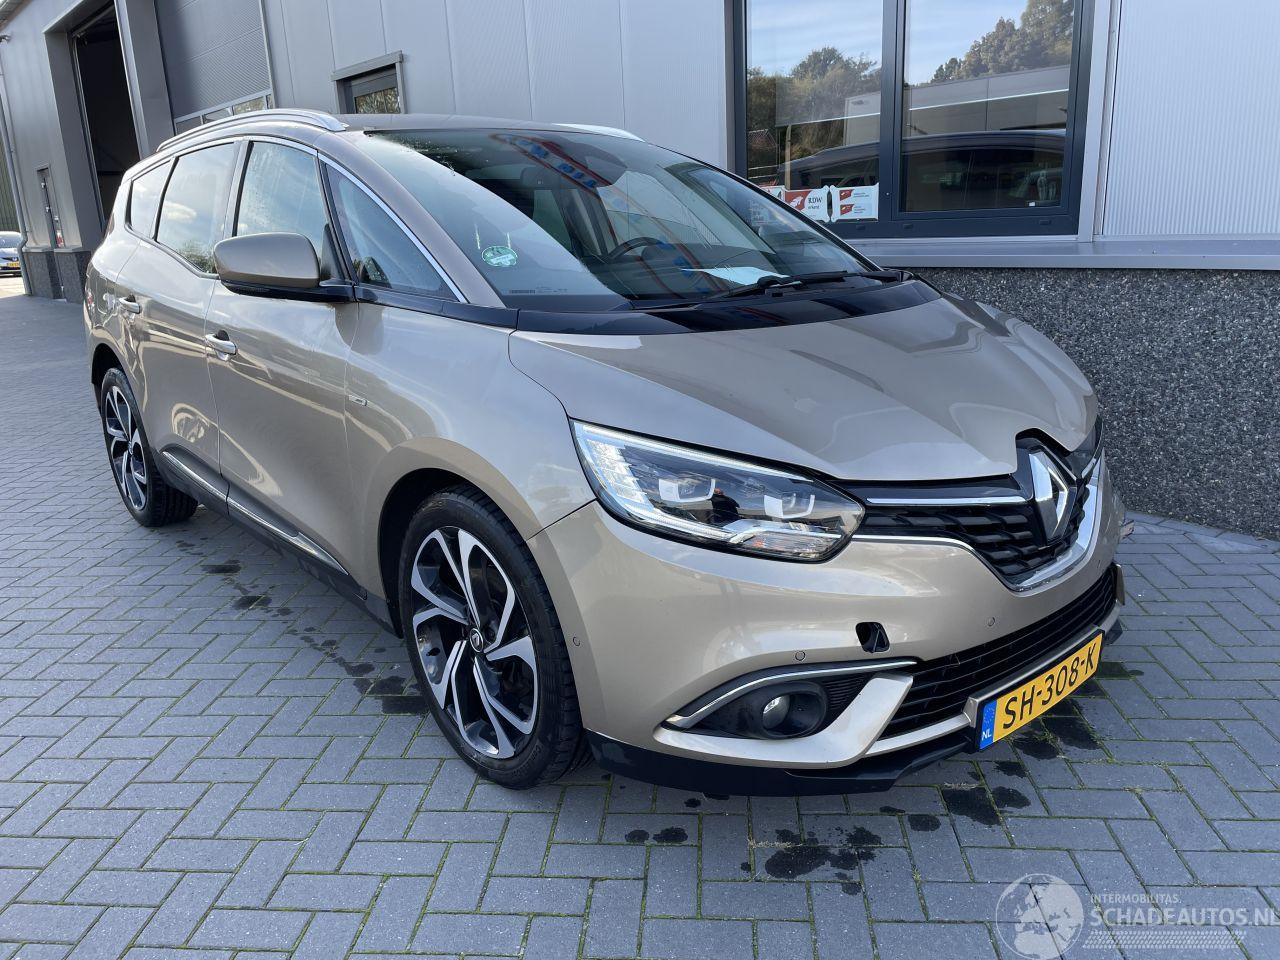 Renault Grand-scenic 1.6DCI 96kw Bose